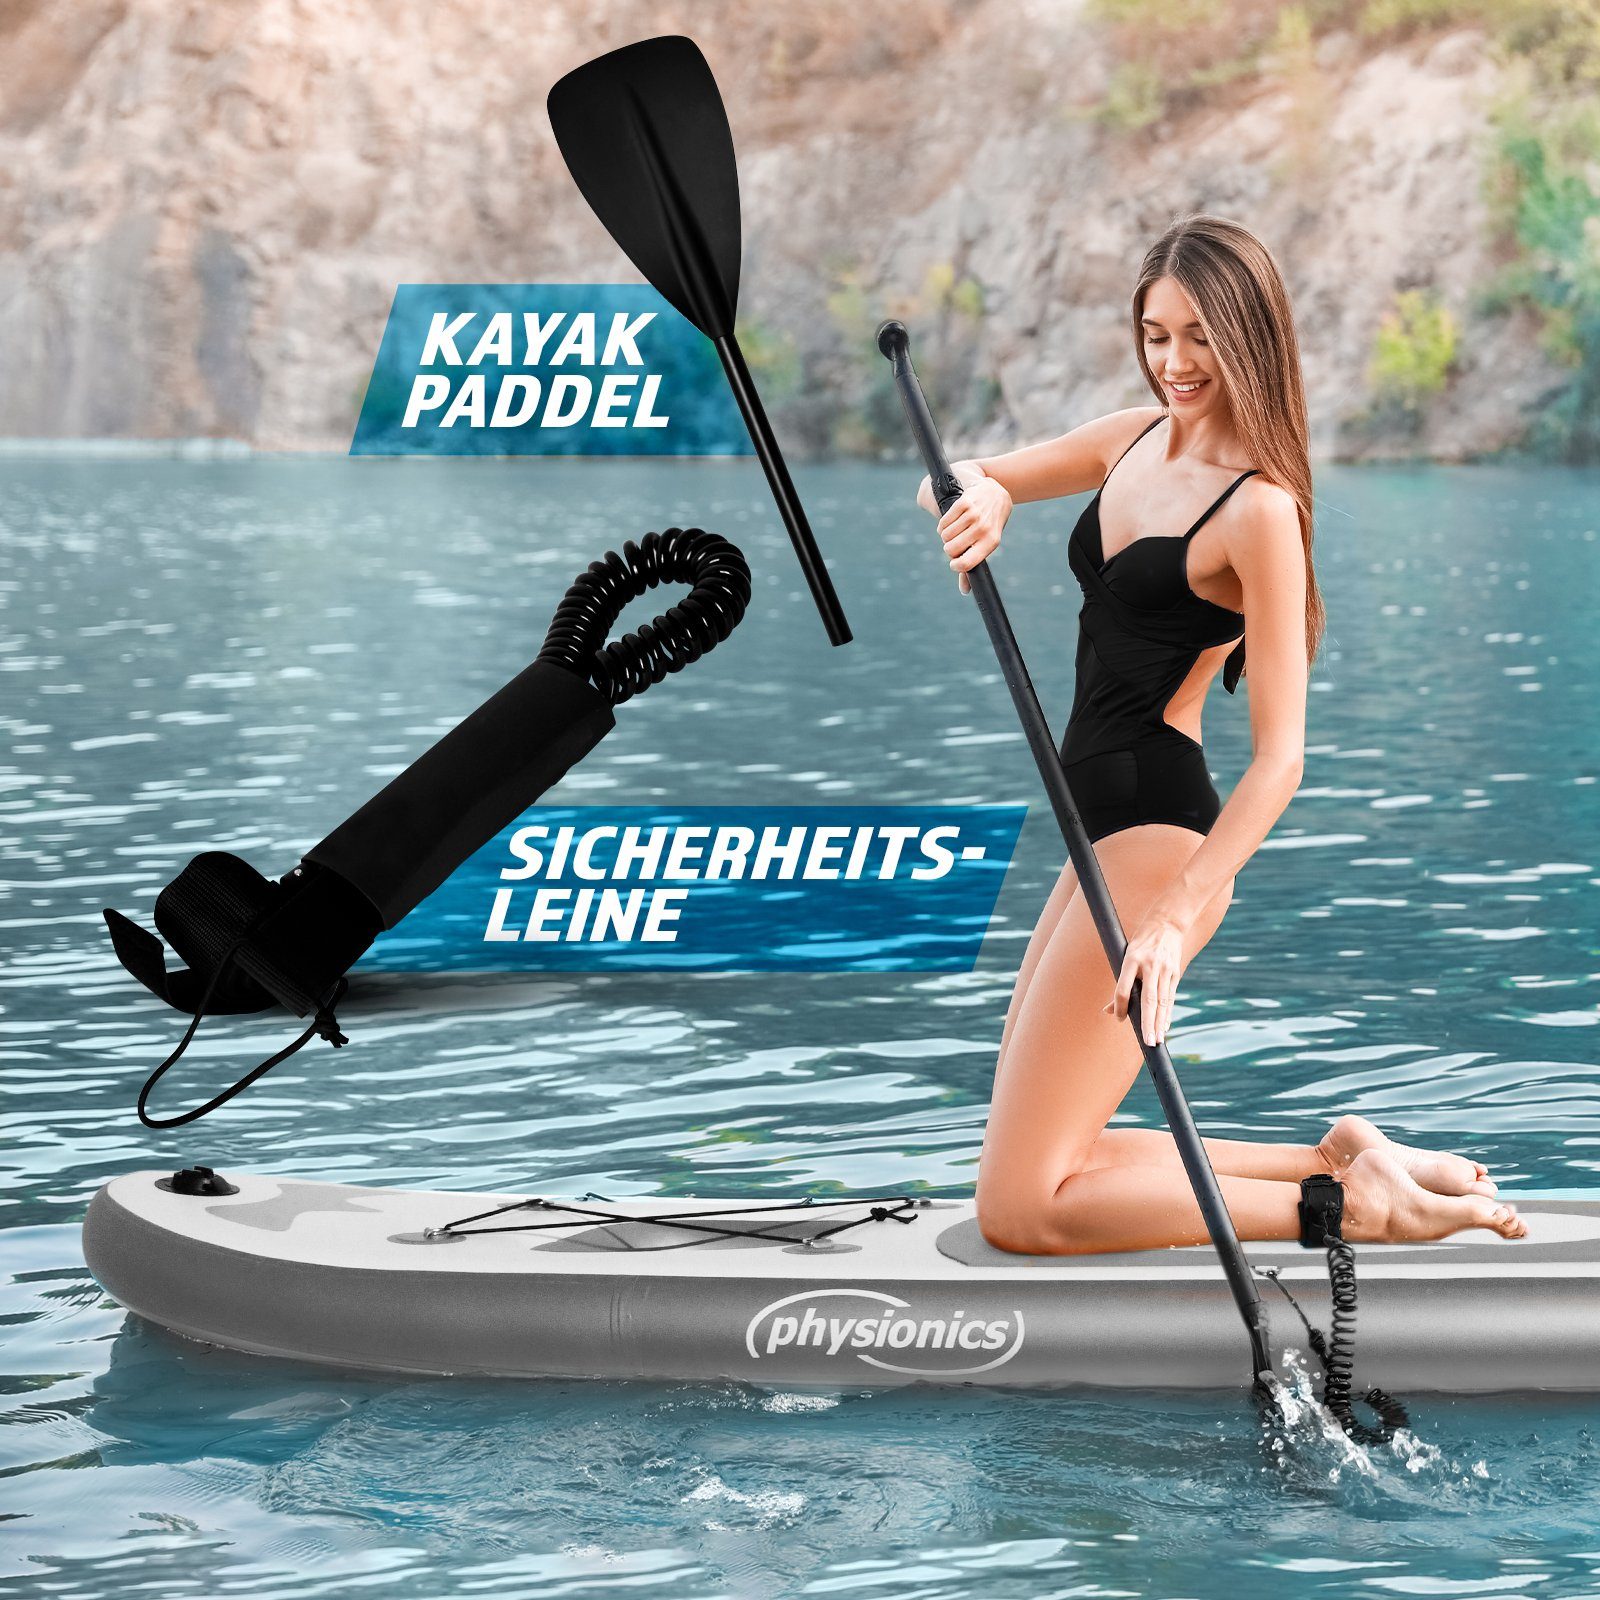 Board Physionics SUP-Board SUP Aufblasbares Stand Anubis(Silber) 320cm Board Paddle Up